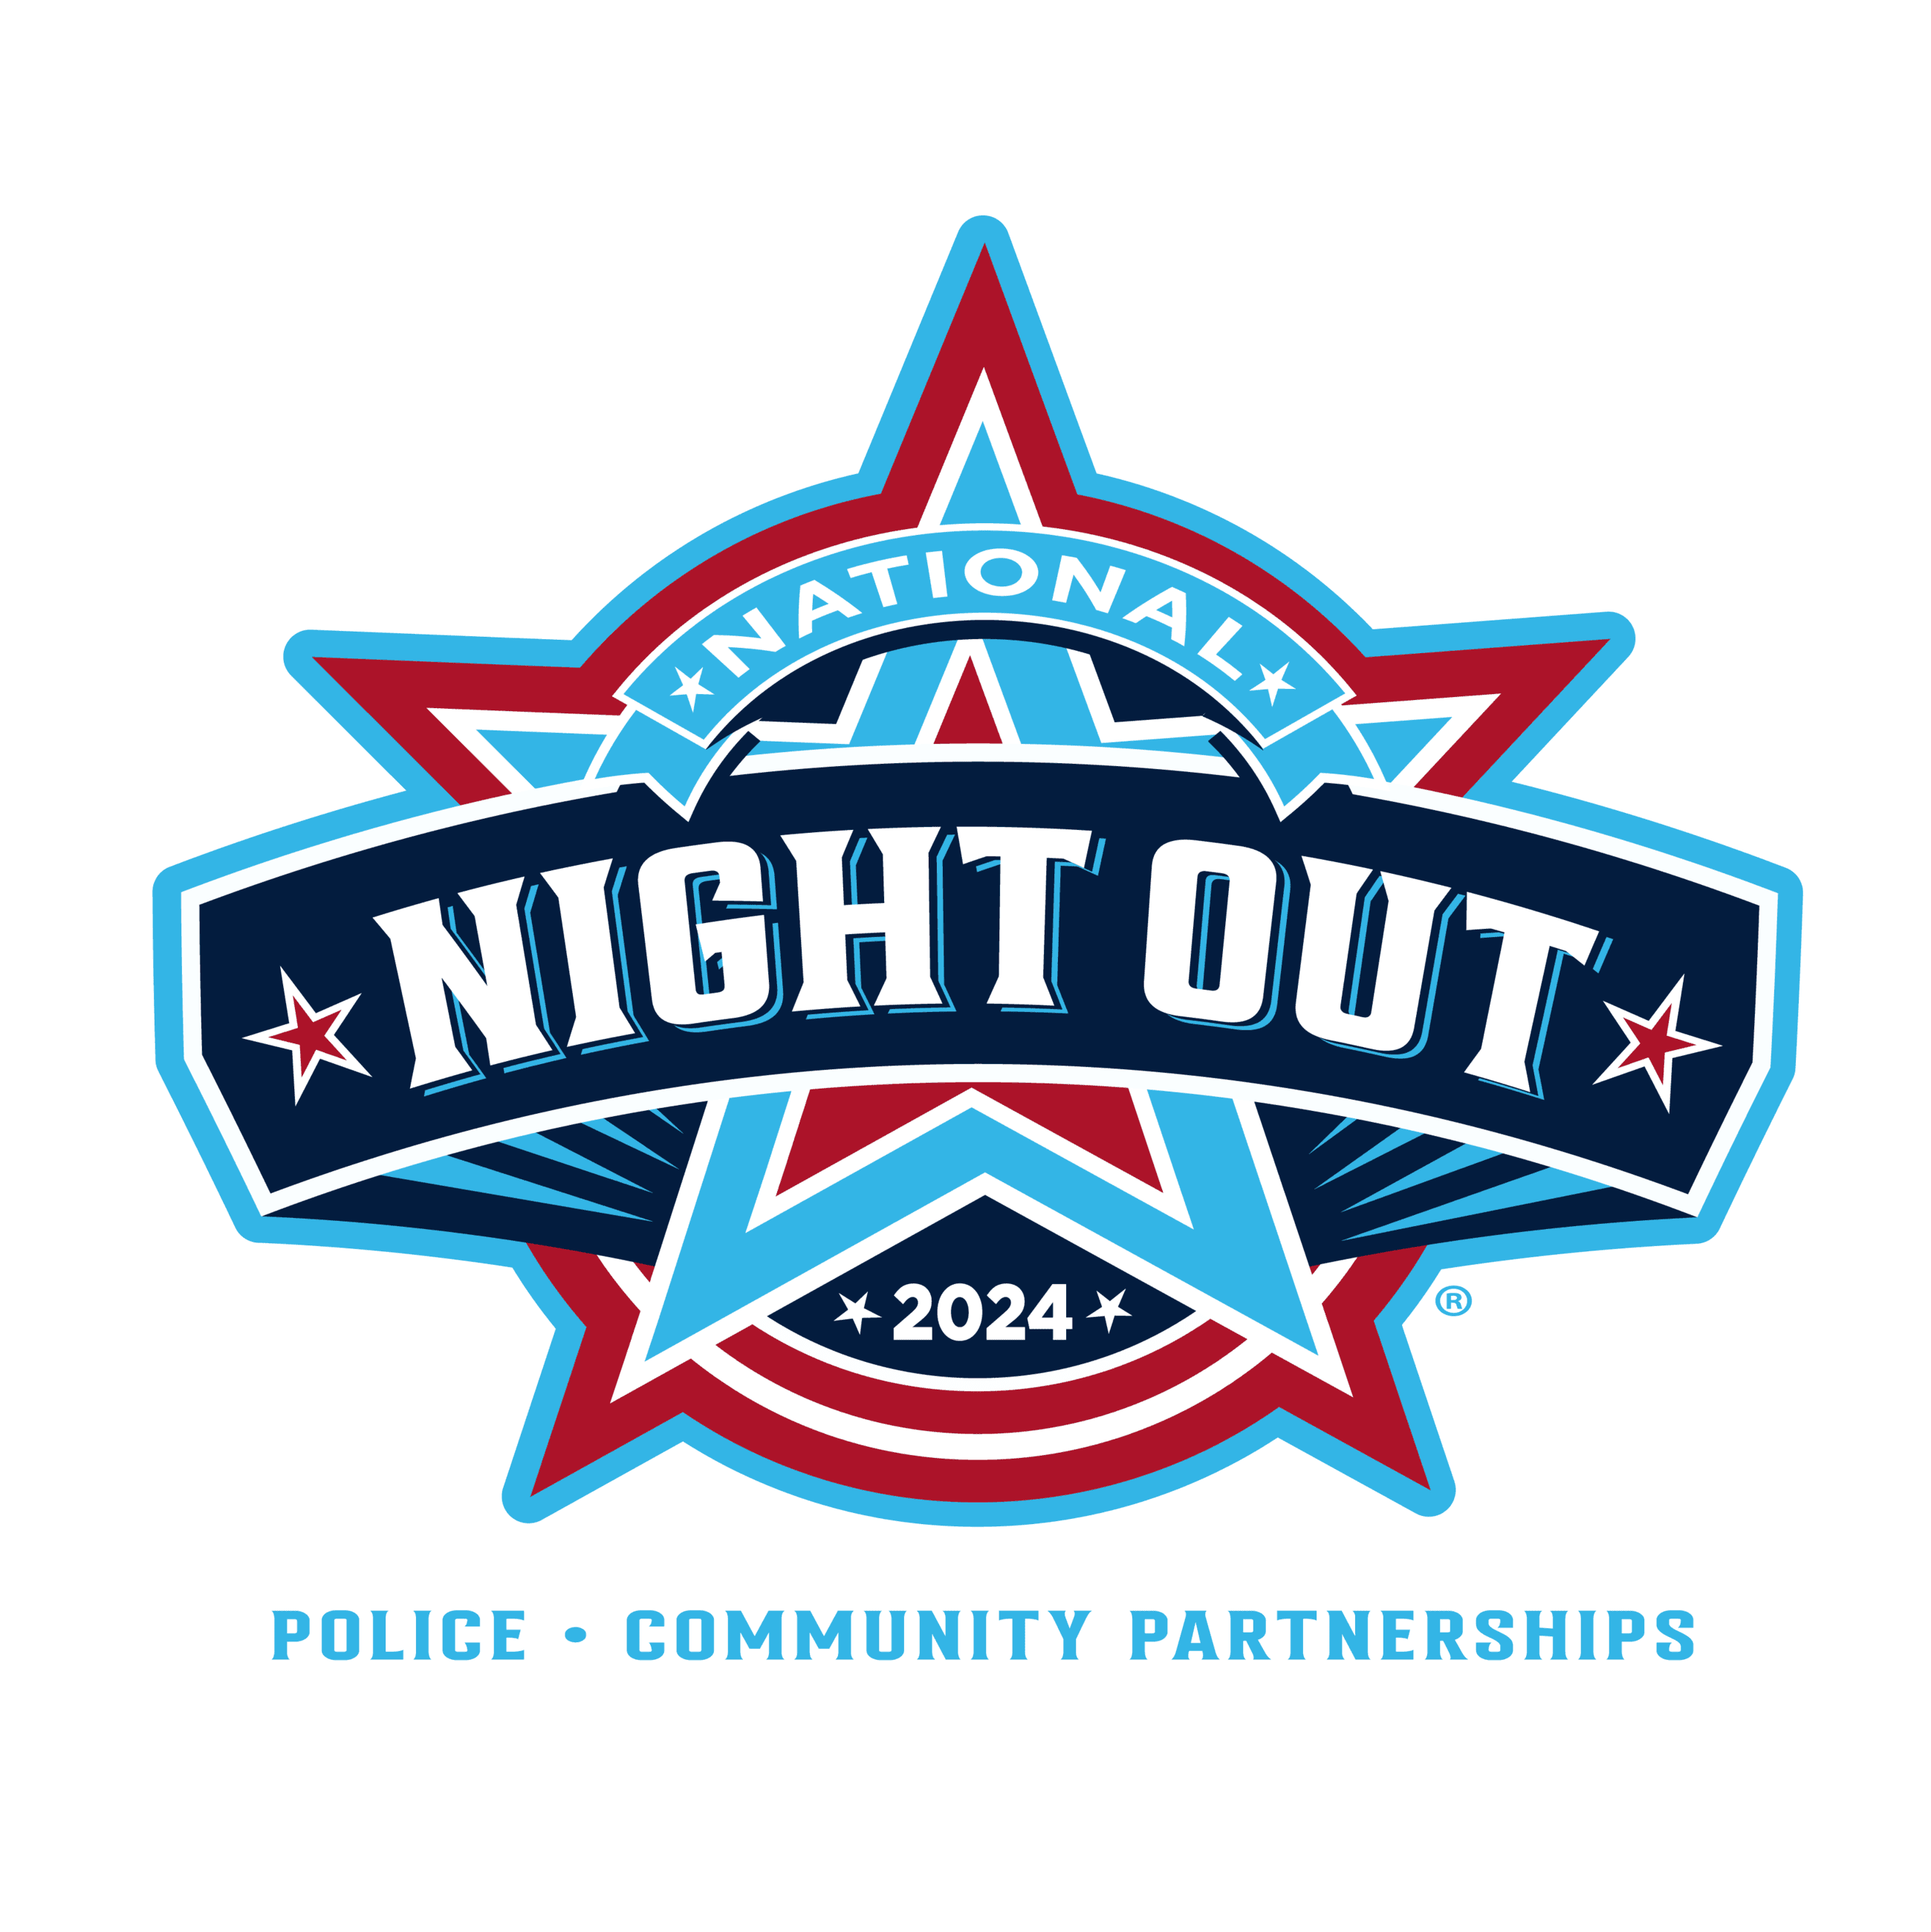 Join us August 6 for National Night Out